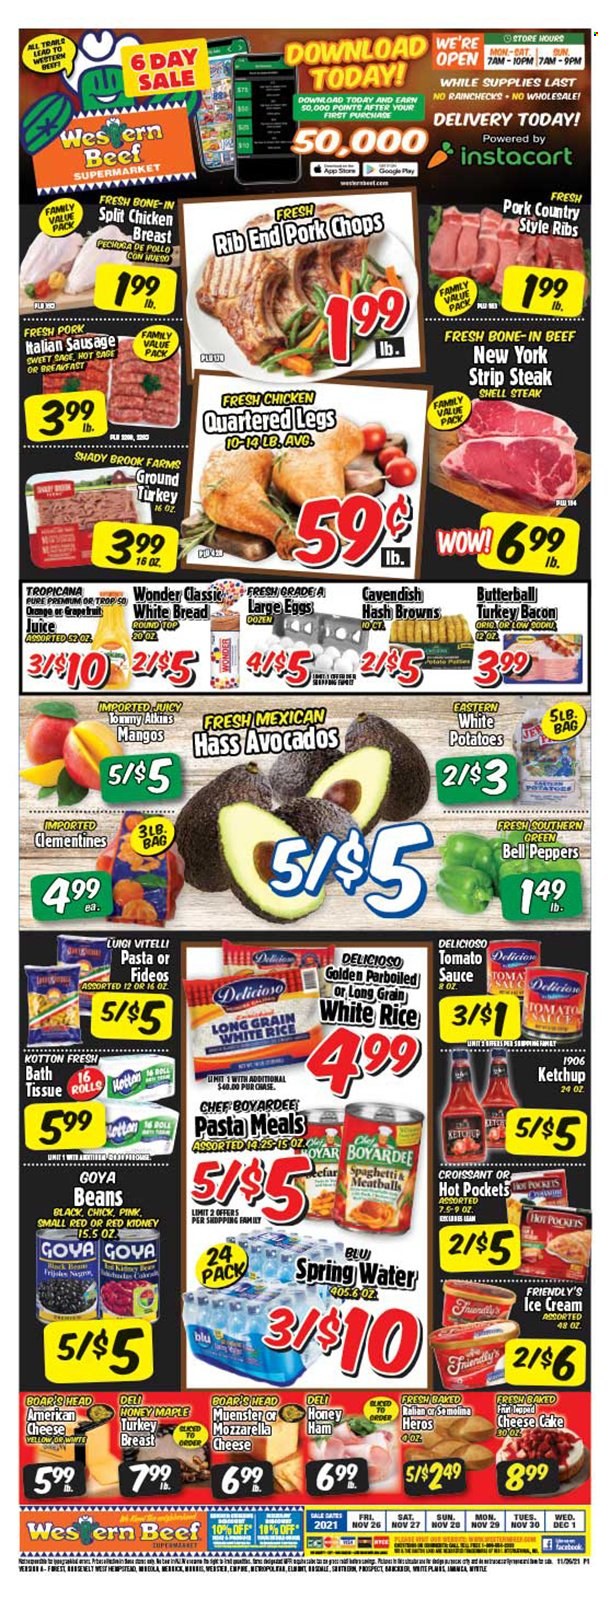 thumbnail - Western Beef Flyer - 11/26/2021 - 12/01/2021 - Sales products - bread, white bread, cake, croissant, cheesecake, bell peppers, potatoes, peppers, avocado, mango, Butterball, ground turkey, turkey breast, chicken breasts, beef meat, steak, sirloin steak, striploin steak, pork chops, pork meat, pork ribs, country style ribs, spaghetti, sauce, bacon, turkey bacon, ham, sausage, italian sausage, mozzarella, cheese, Münster cheese, large eggs, Friendly's Ice Cream, hash browns, semolina, Goya, Chef Boyardee, rice, white rice, ketchup, spring water, clementines. Page 1.